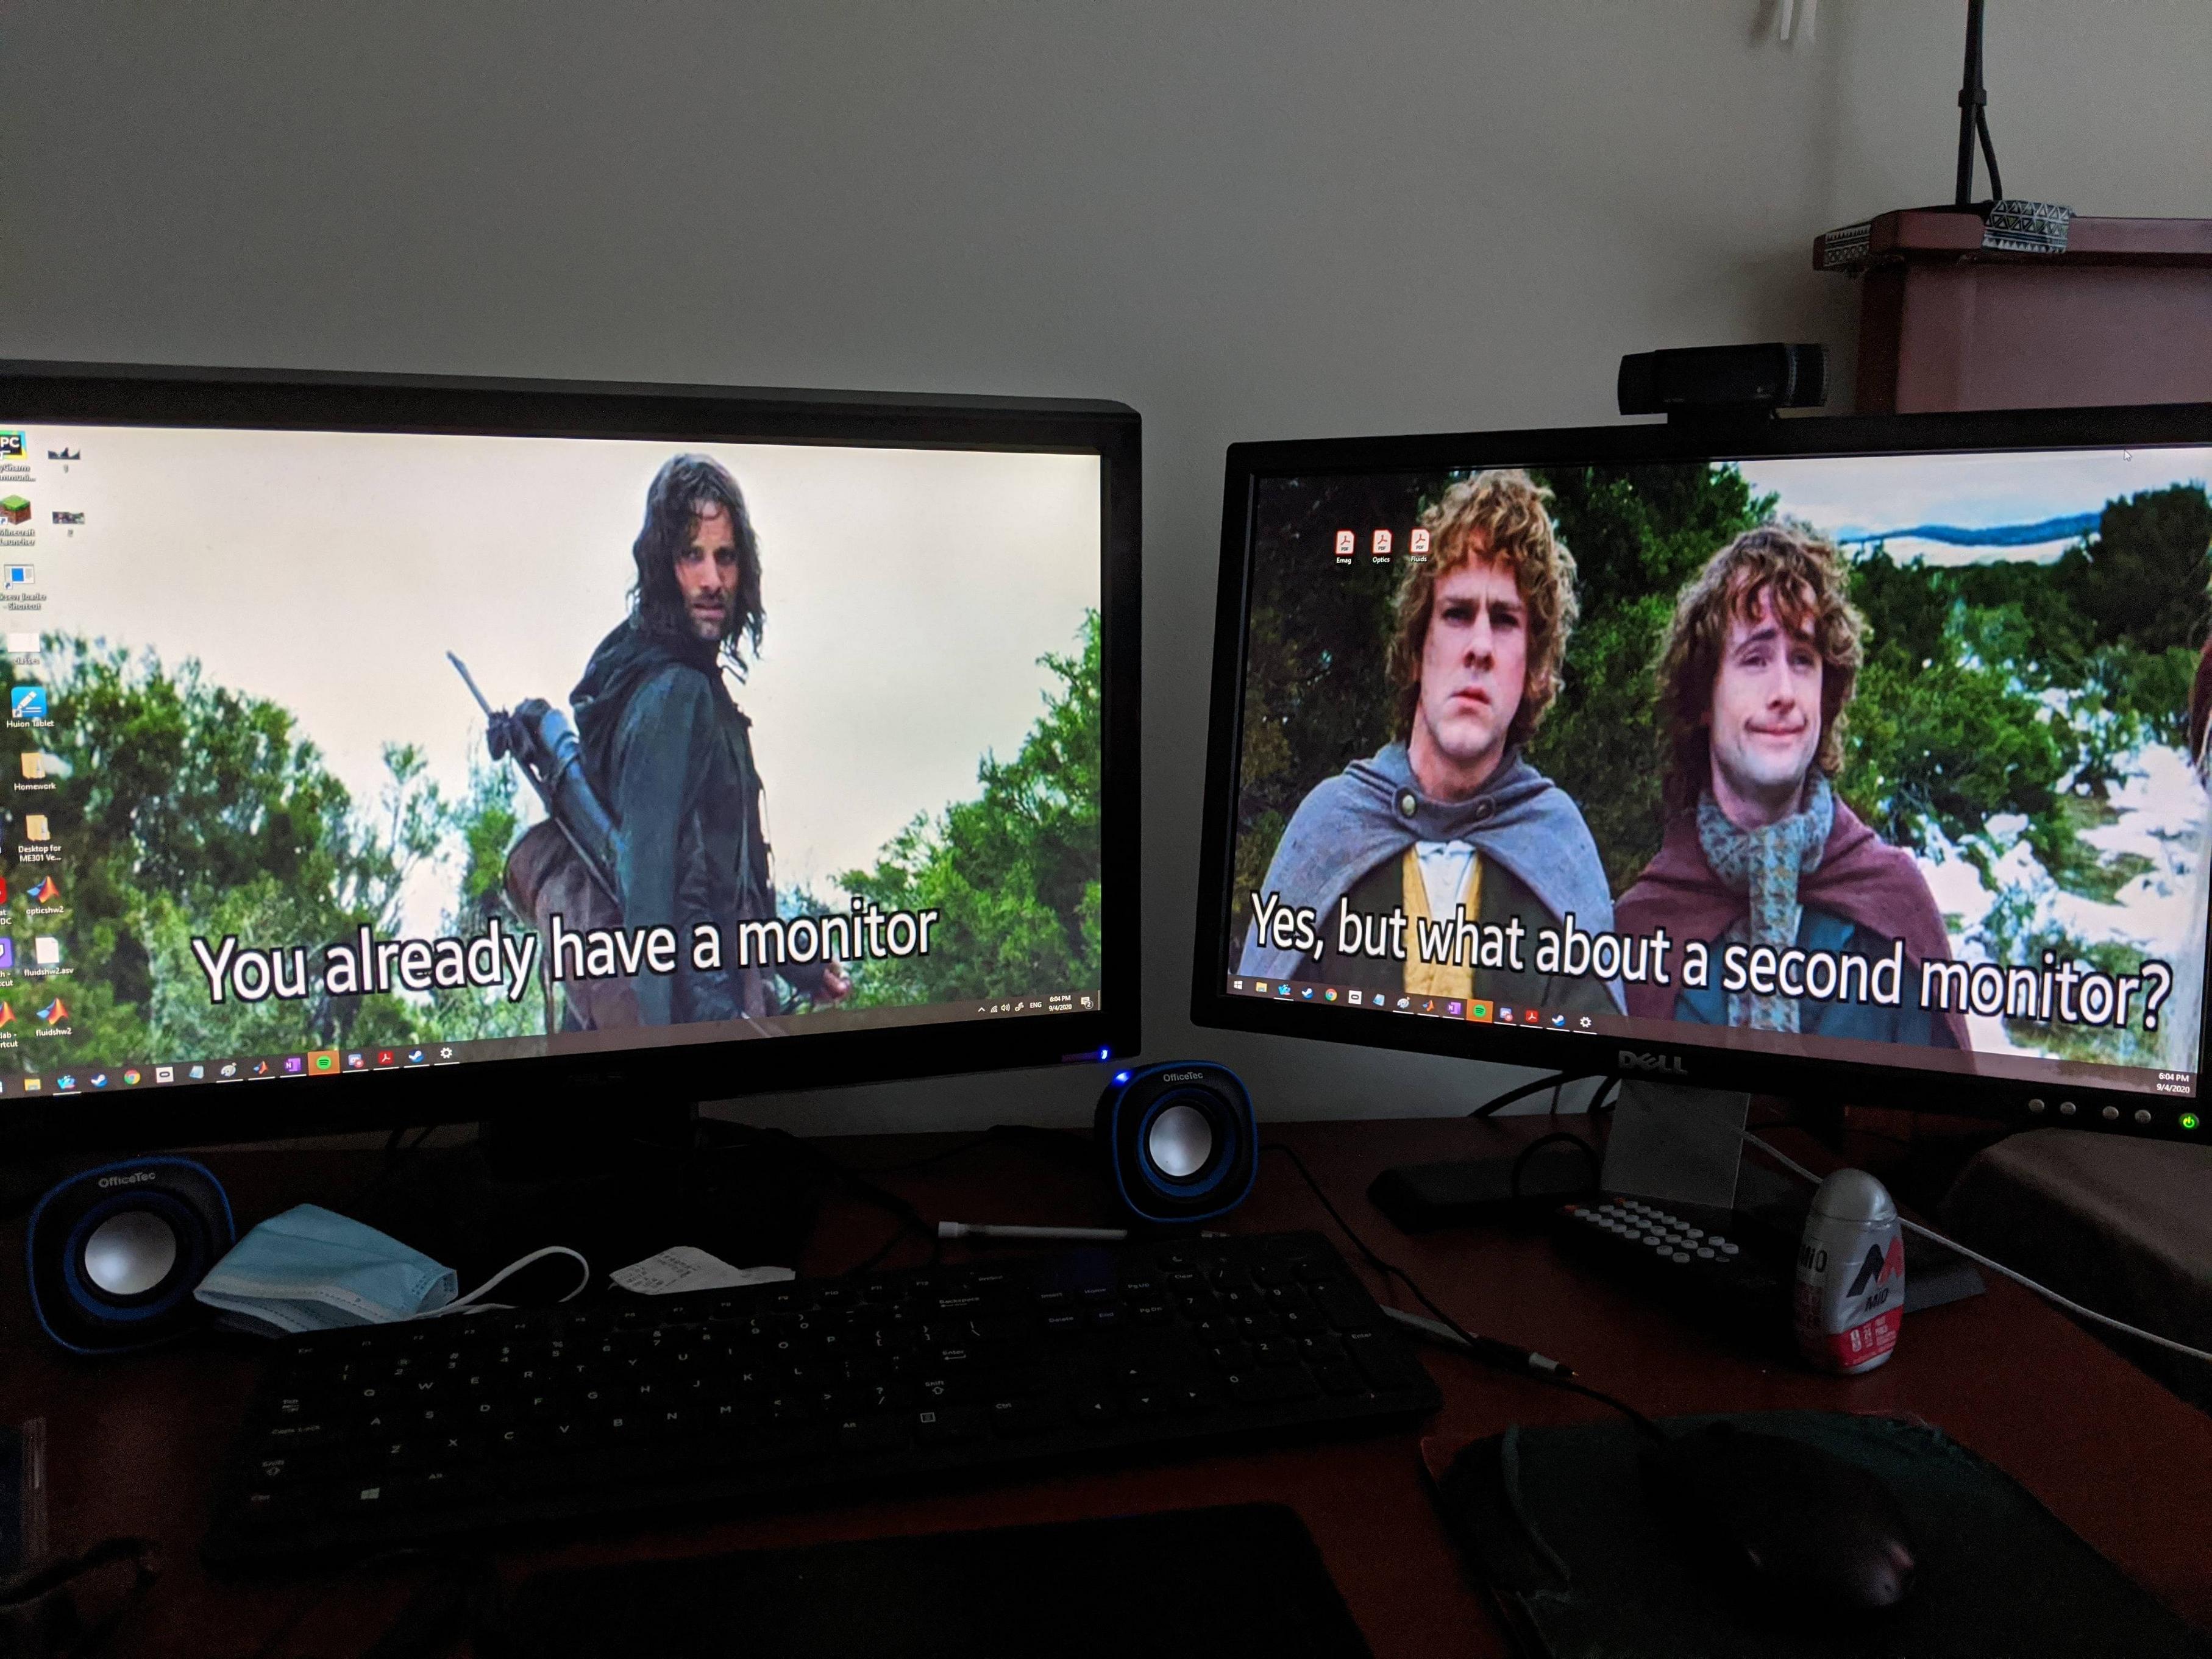 funny gaming memes - second monitor lotr - > Yes, but what about a second monitor? You already have a monitor